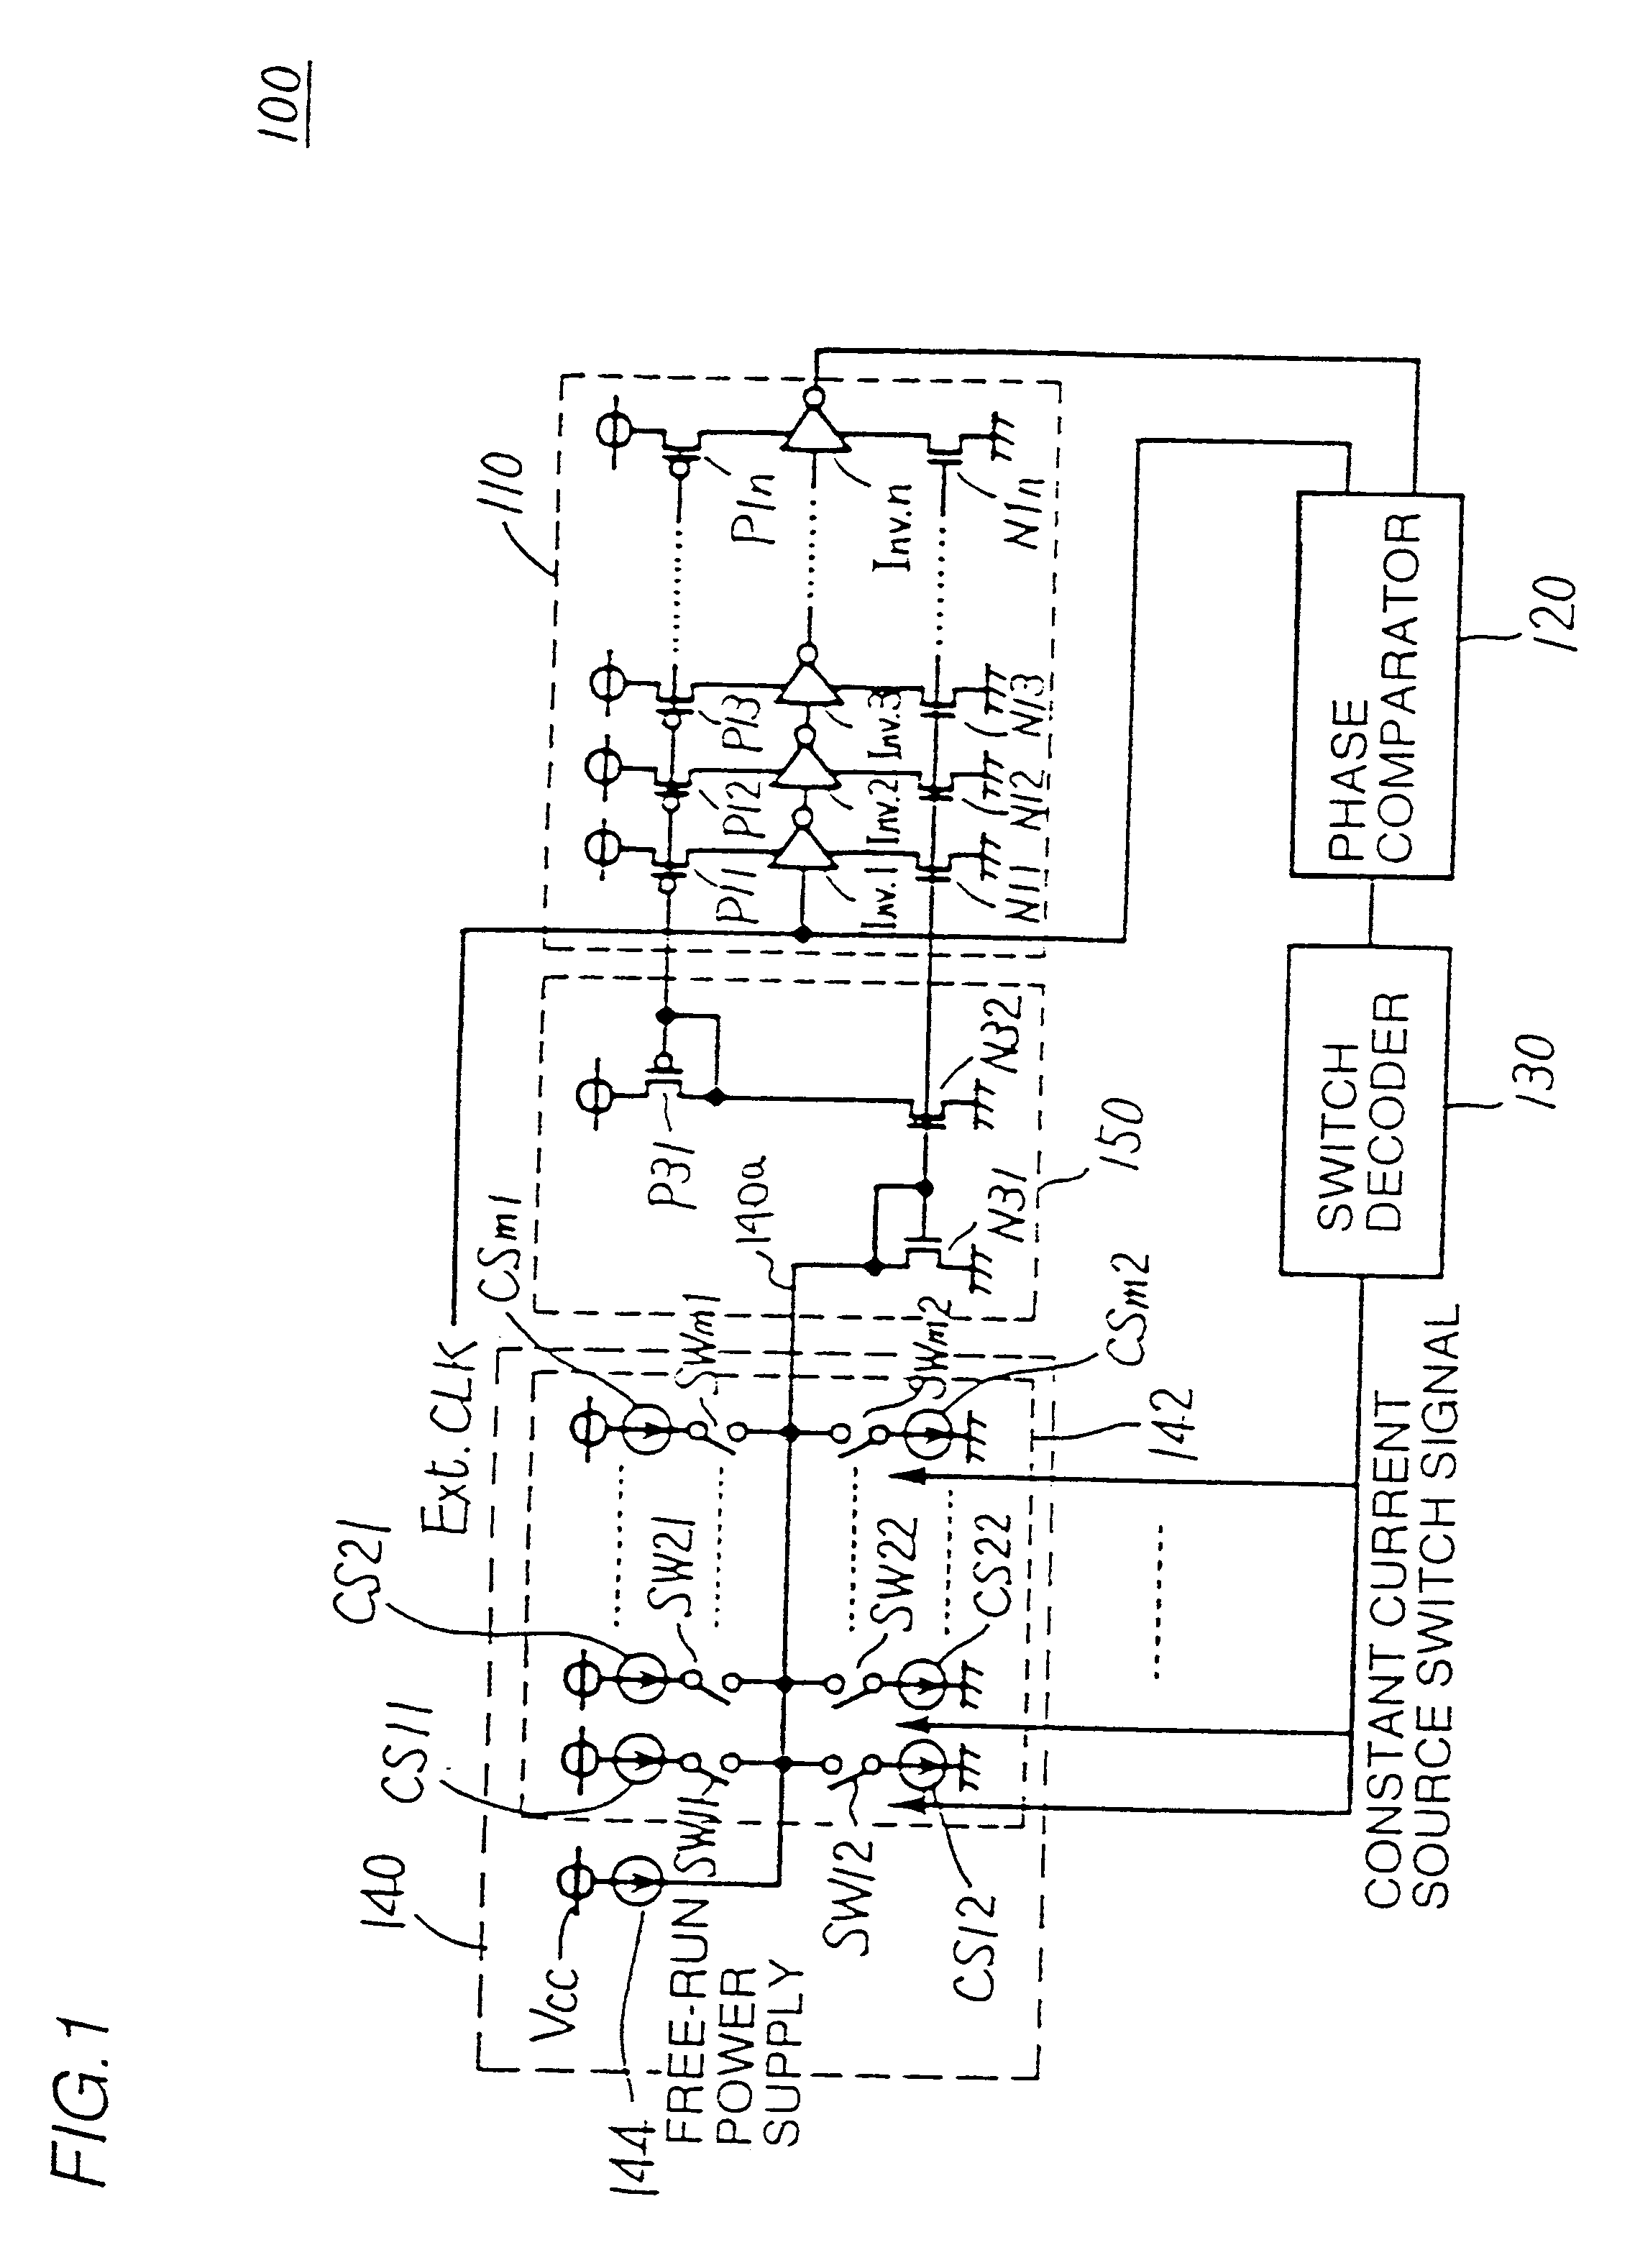 Semiconductor memory device allowing reduction in power consumption during standby